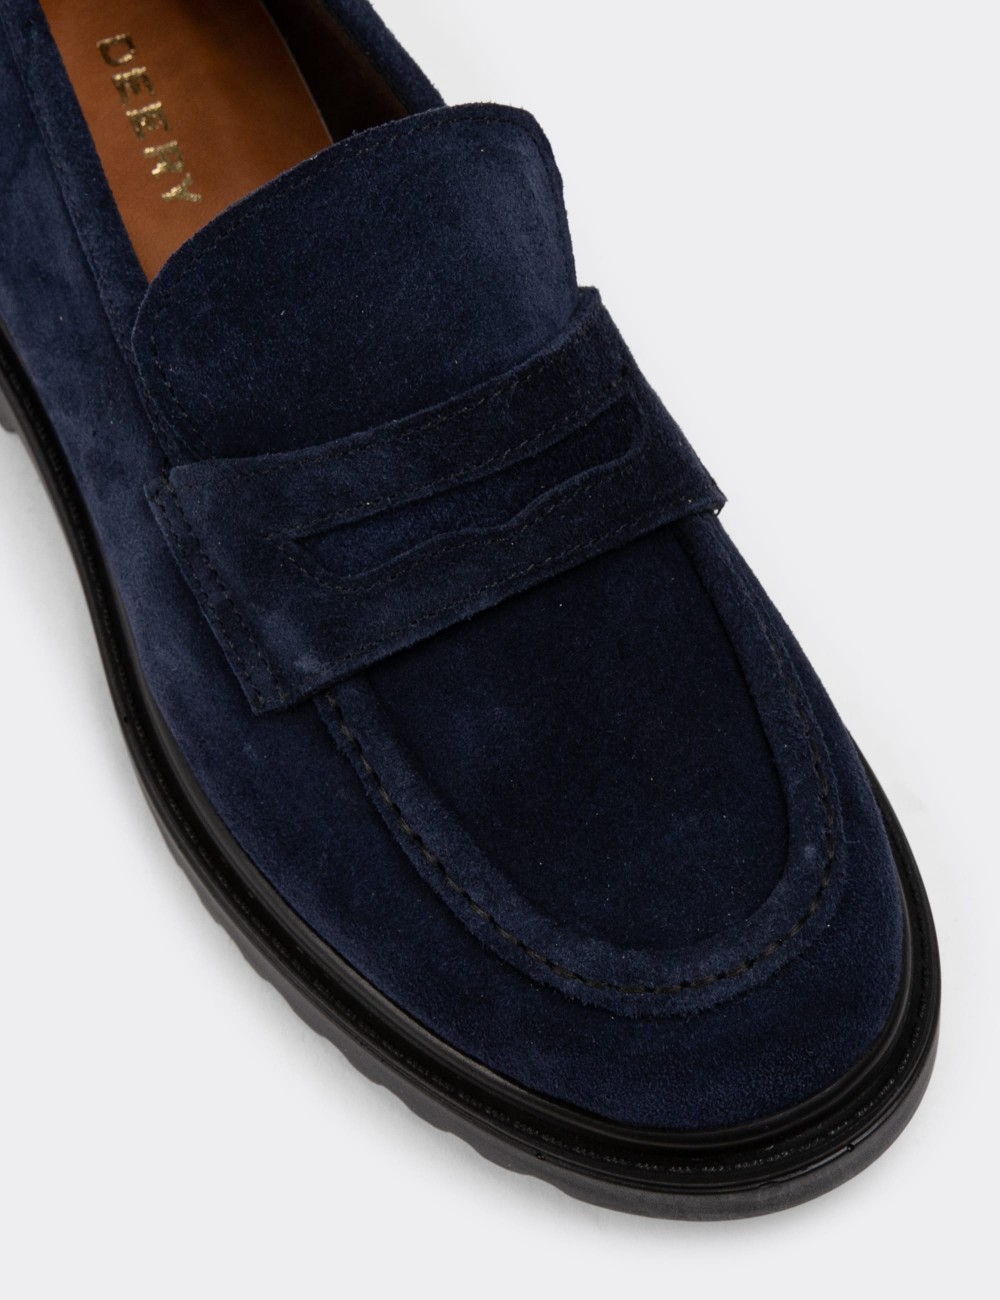 Navy Suede Leather Loafers - 01903ZLCVP01